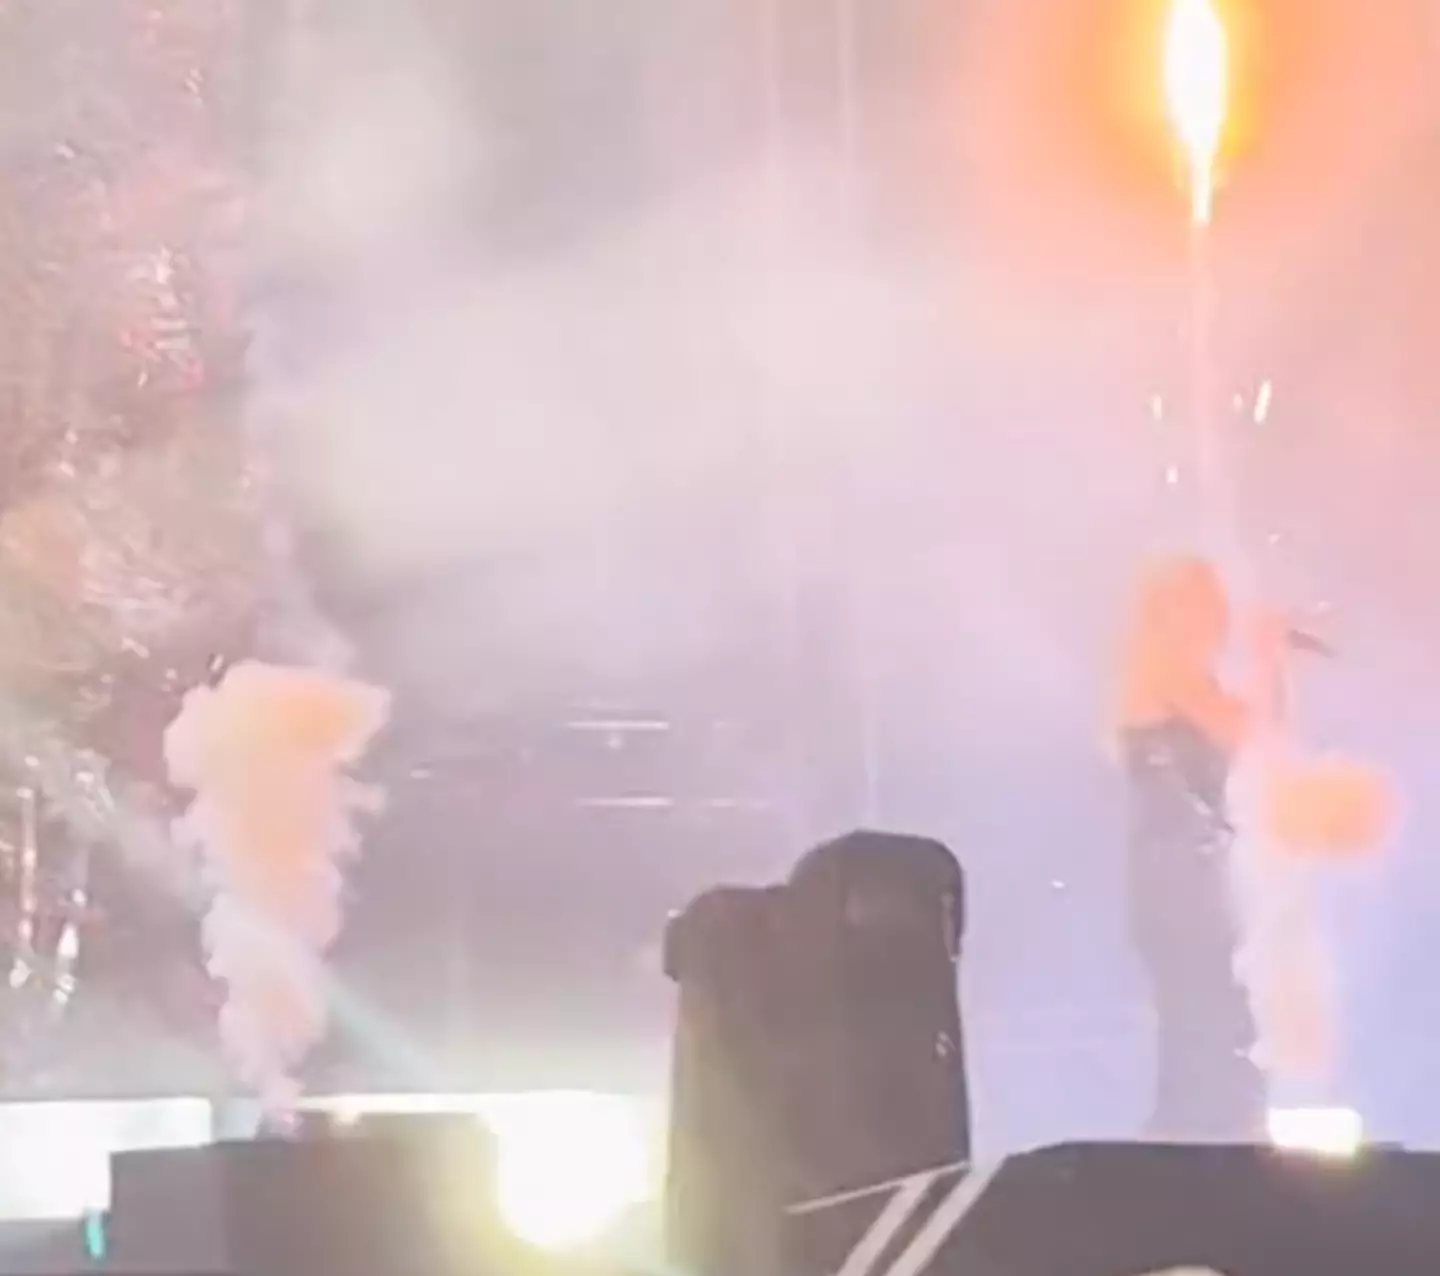 The pyro hit the singer in the face.